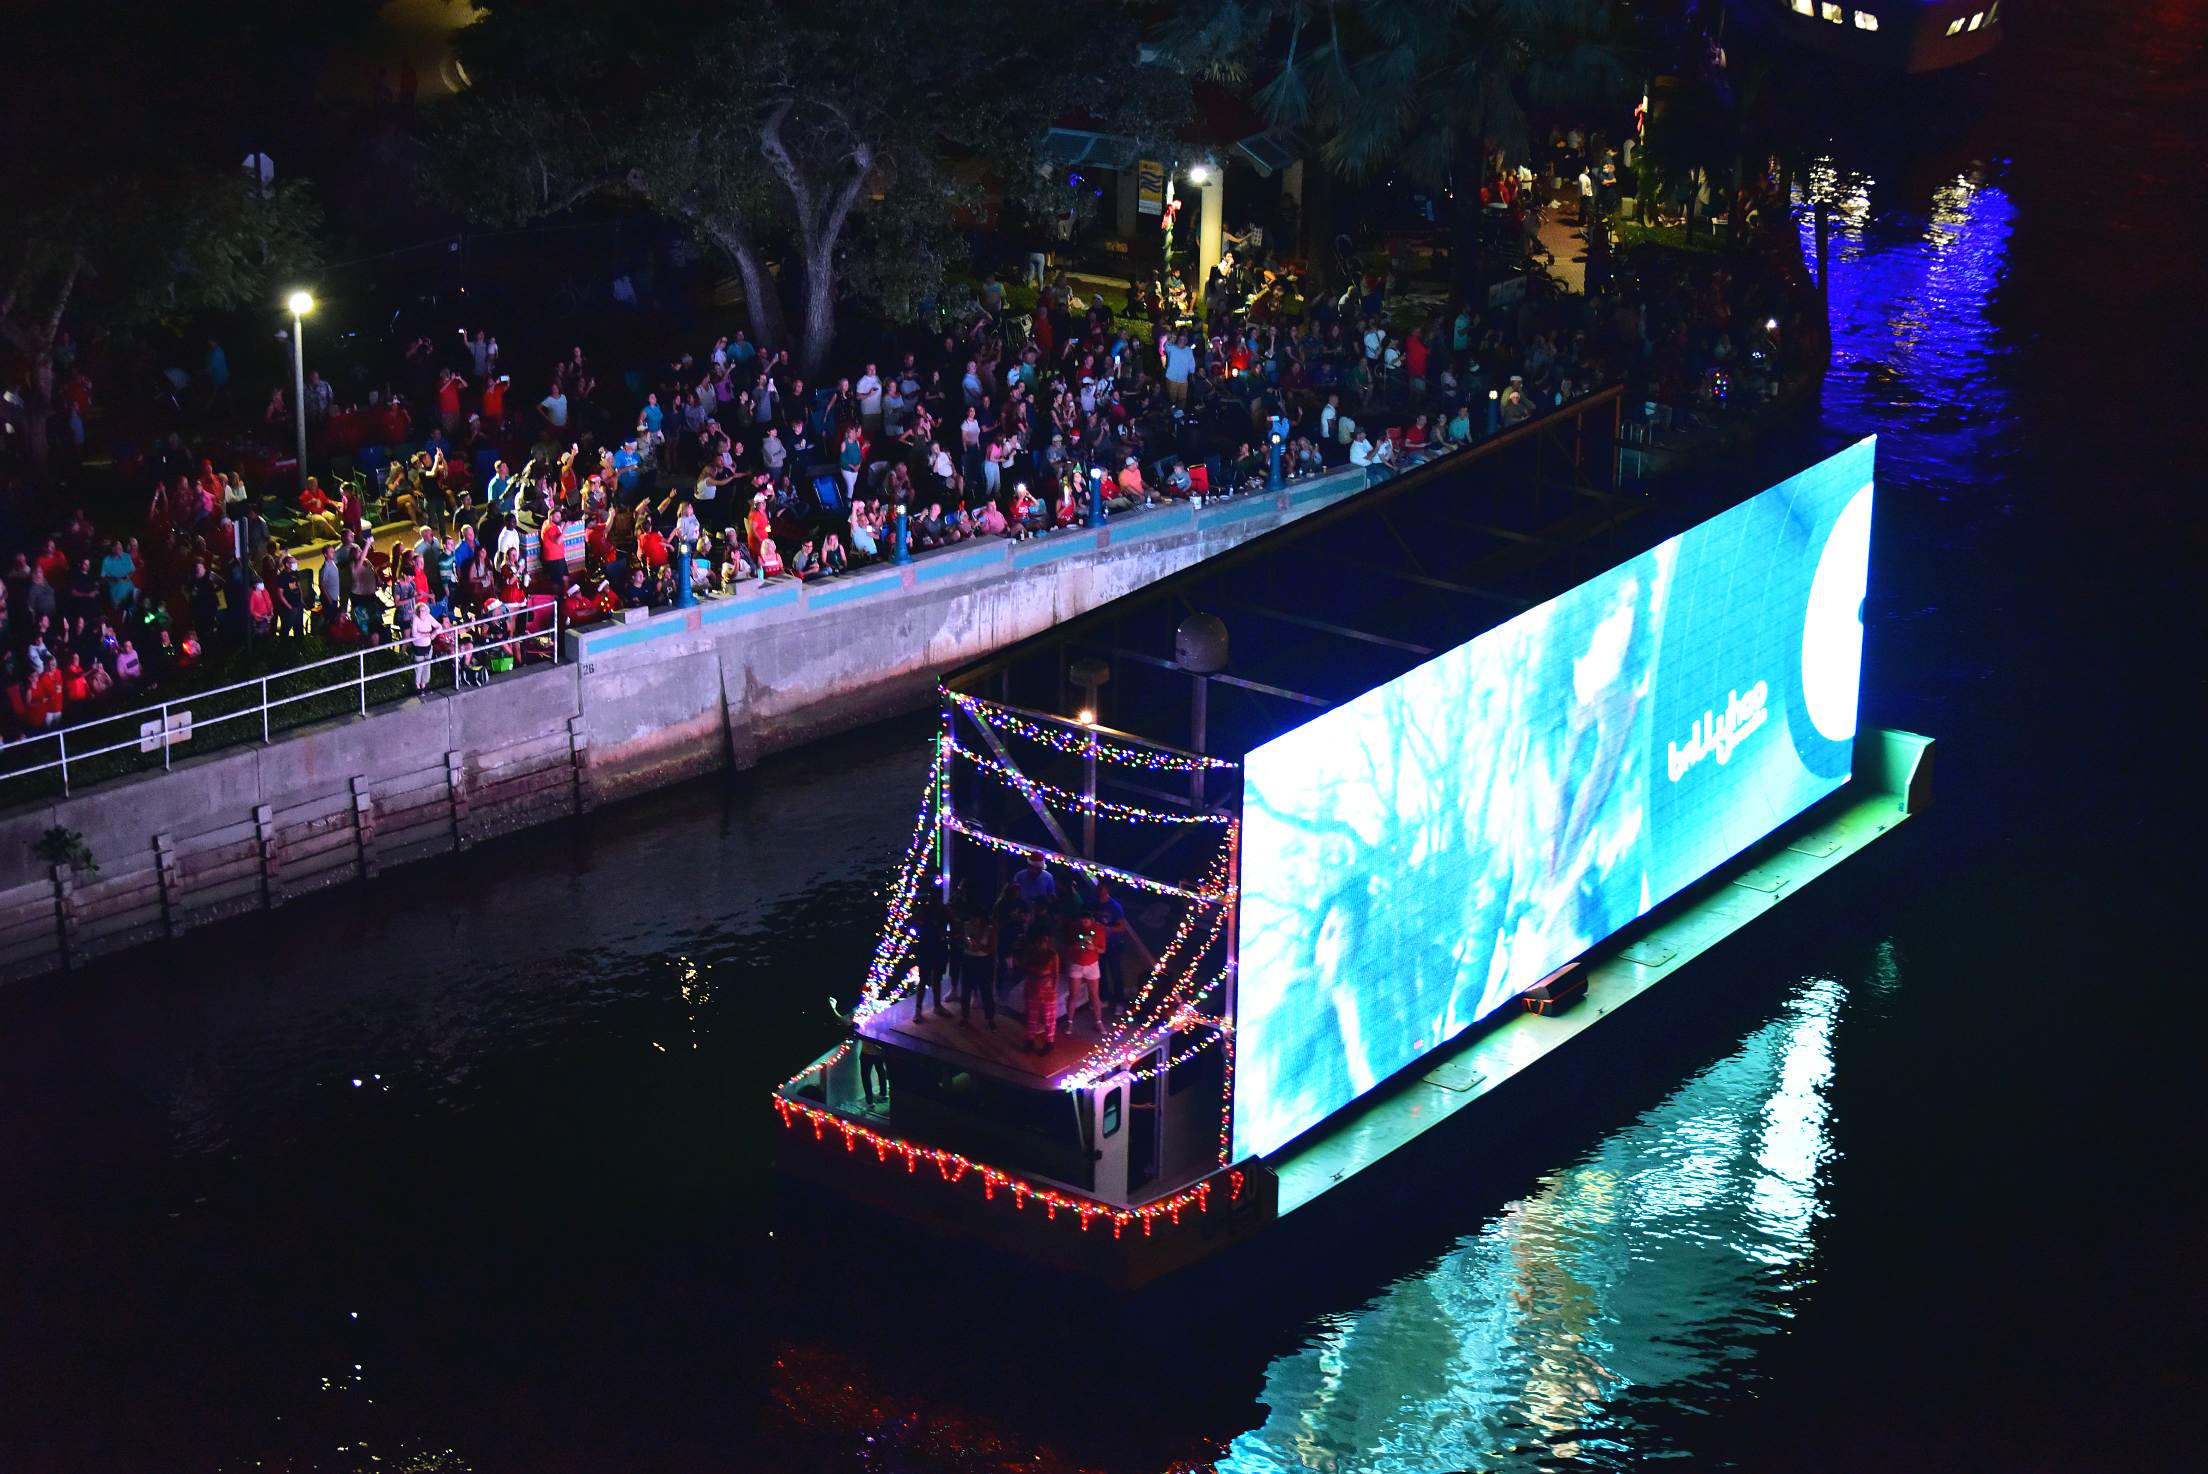 Wellington Conservation Center on board Musette, boat number 19 in the 2021 Winterfest Boat Parade